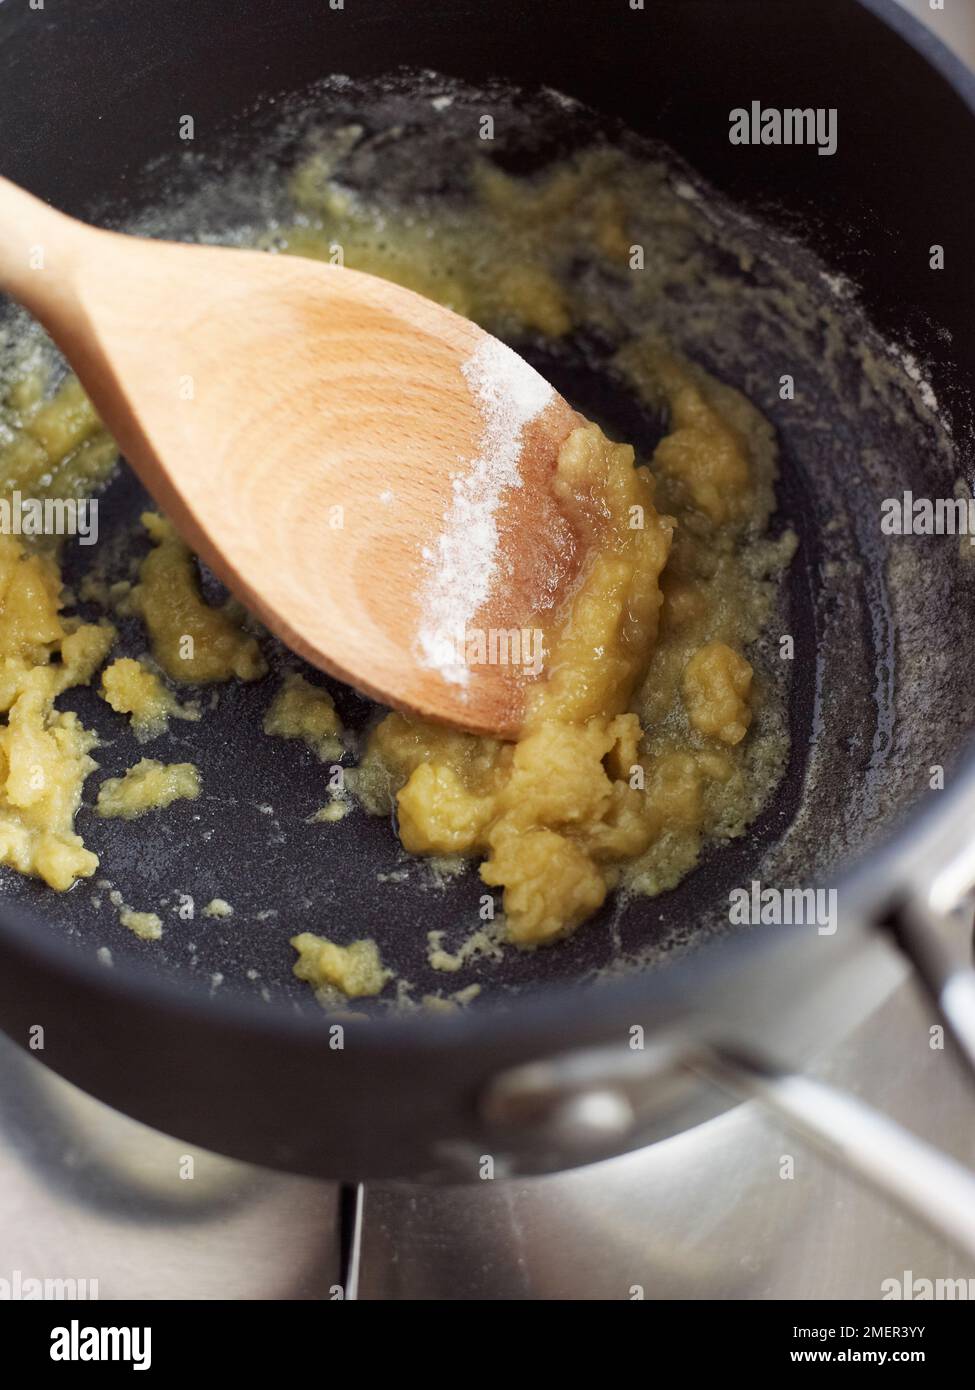 Cooking a roux in heavy-based saucepan (making veloute sauce) Stock Photo